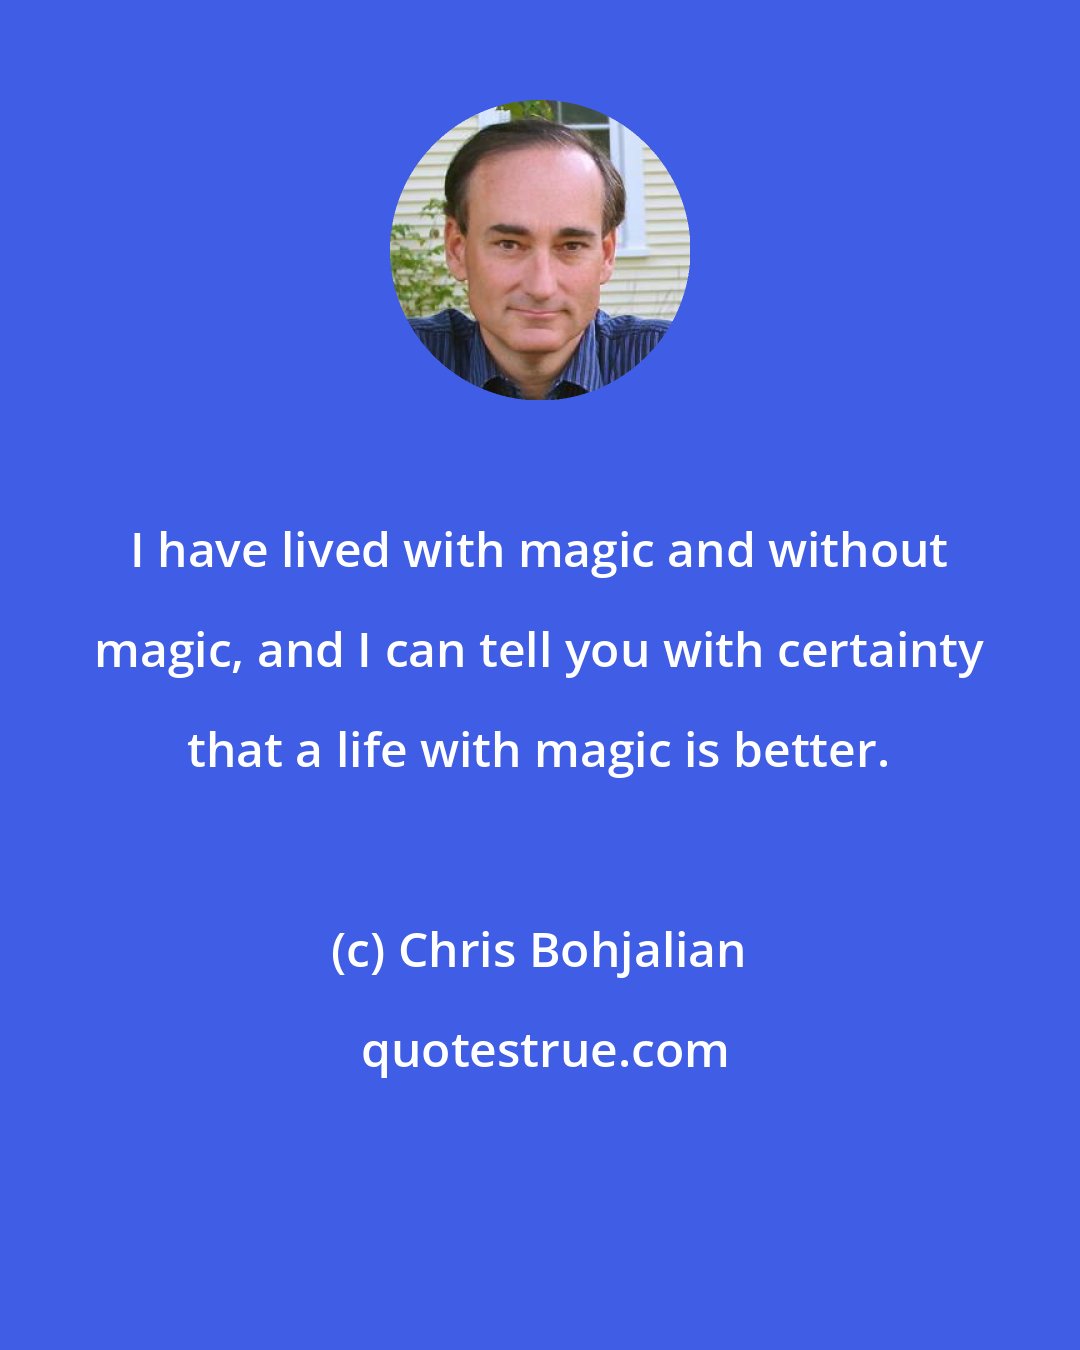 Chris Bohjalian: I have lived with magic and without magic, and I can tell you with certainty that a life with magic is better.